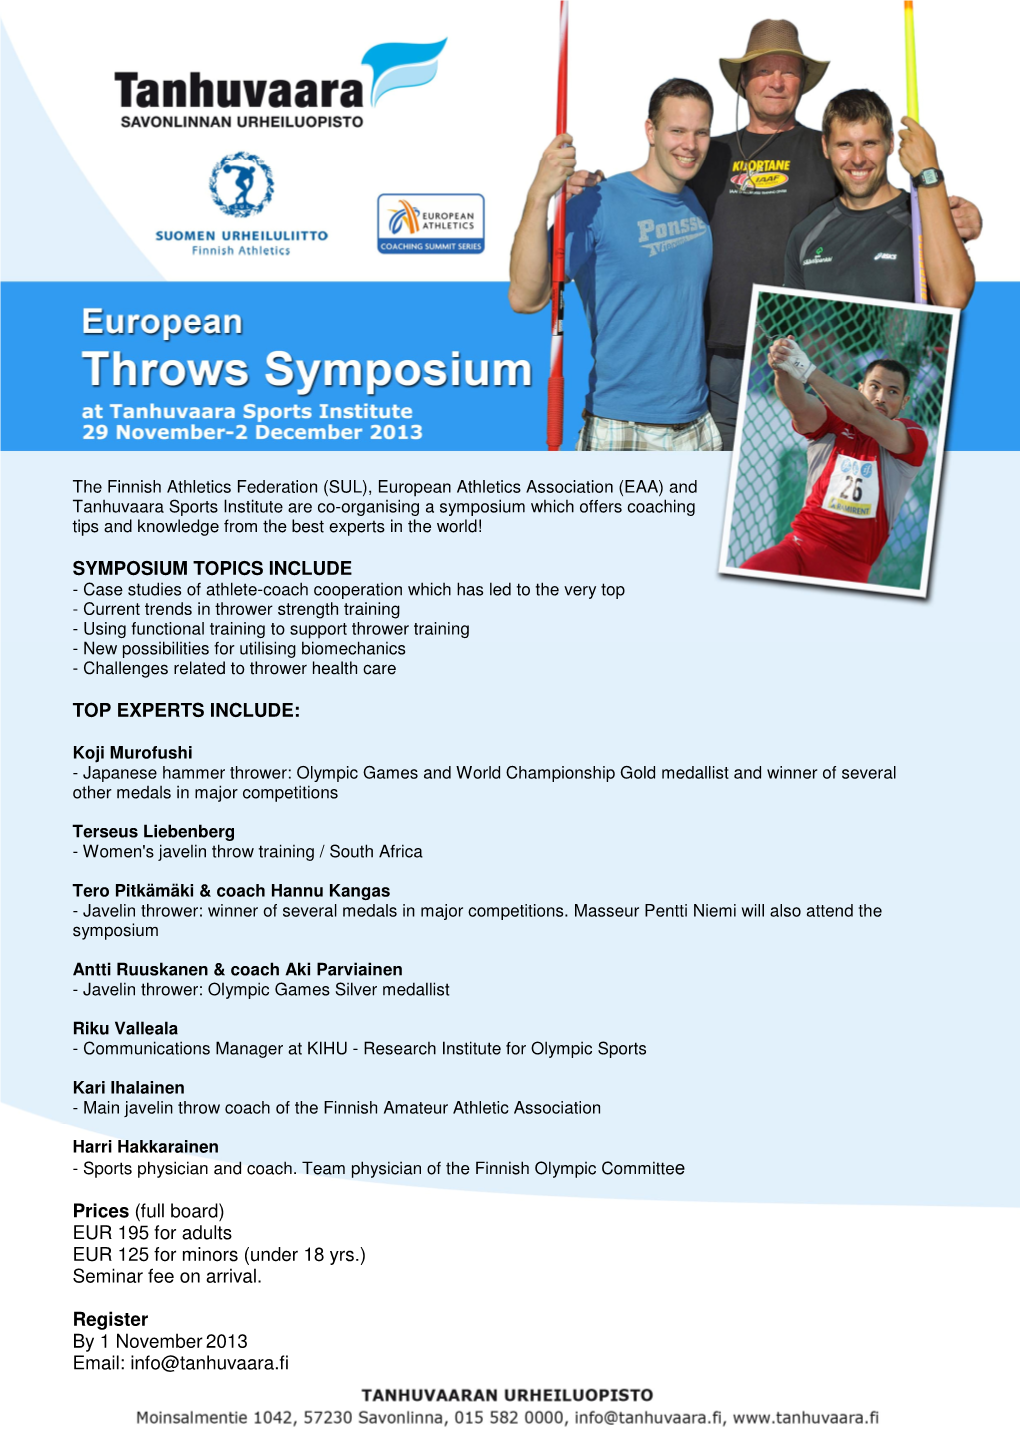 SYMPOSIUM TOPICS INCLUDE TOP EXPERTS INCLUDE: Prices (Full Board) EUR 195 for Adults EUR 125 for Minors (Under 18 Yrs.) Seminar